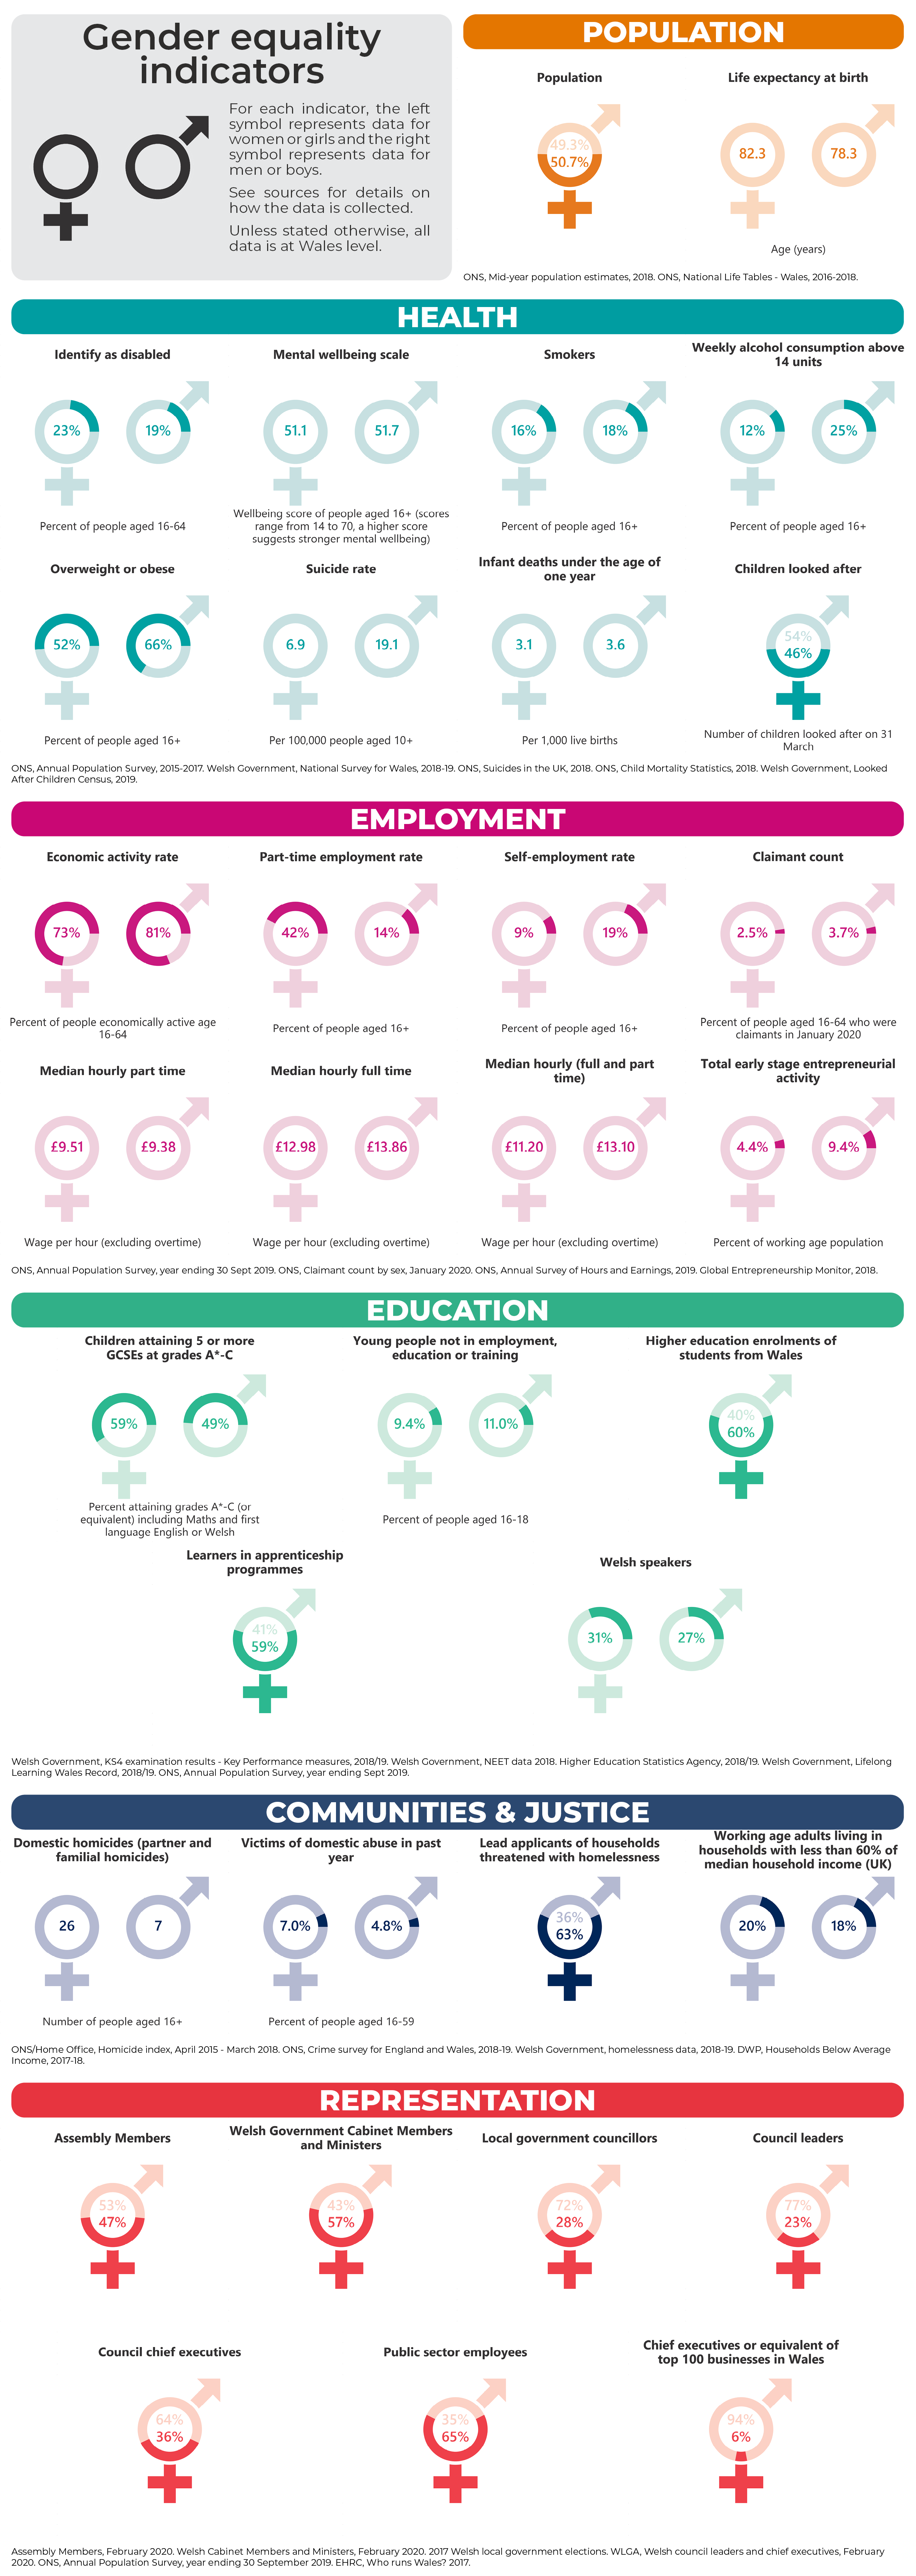 An infographic showing a range of statistics about gender